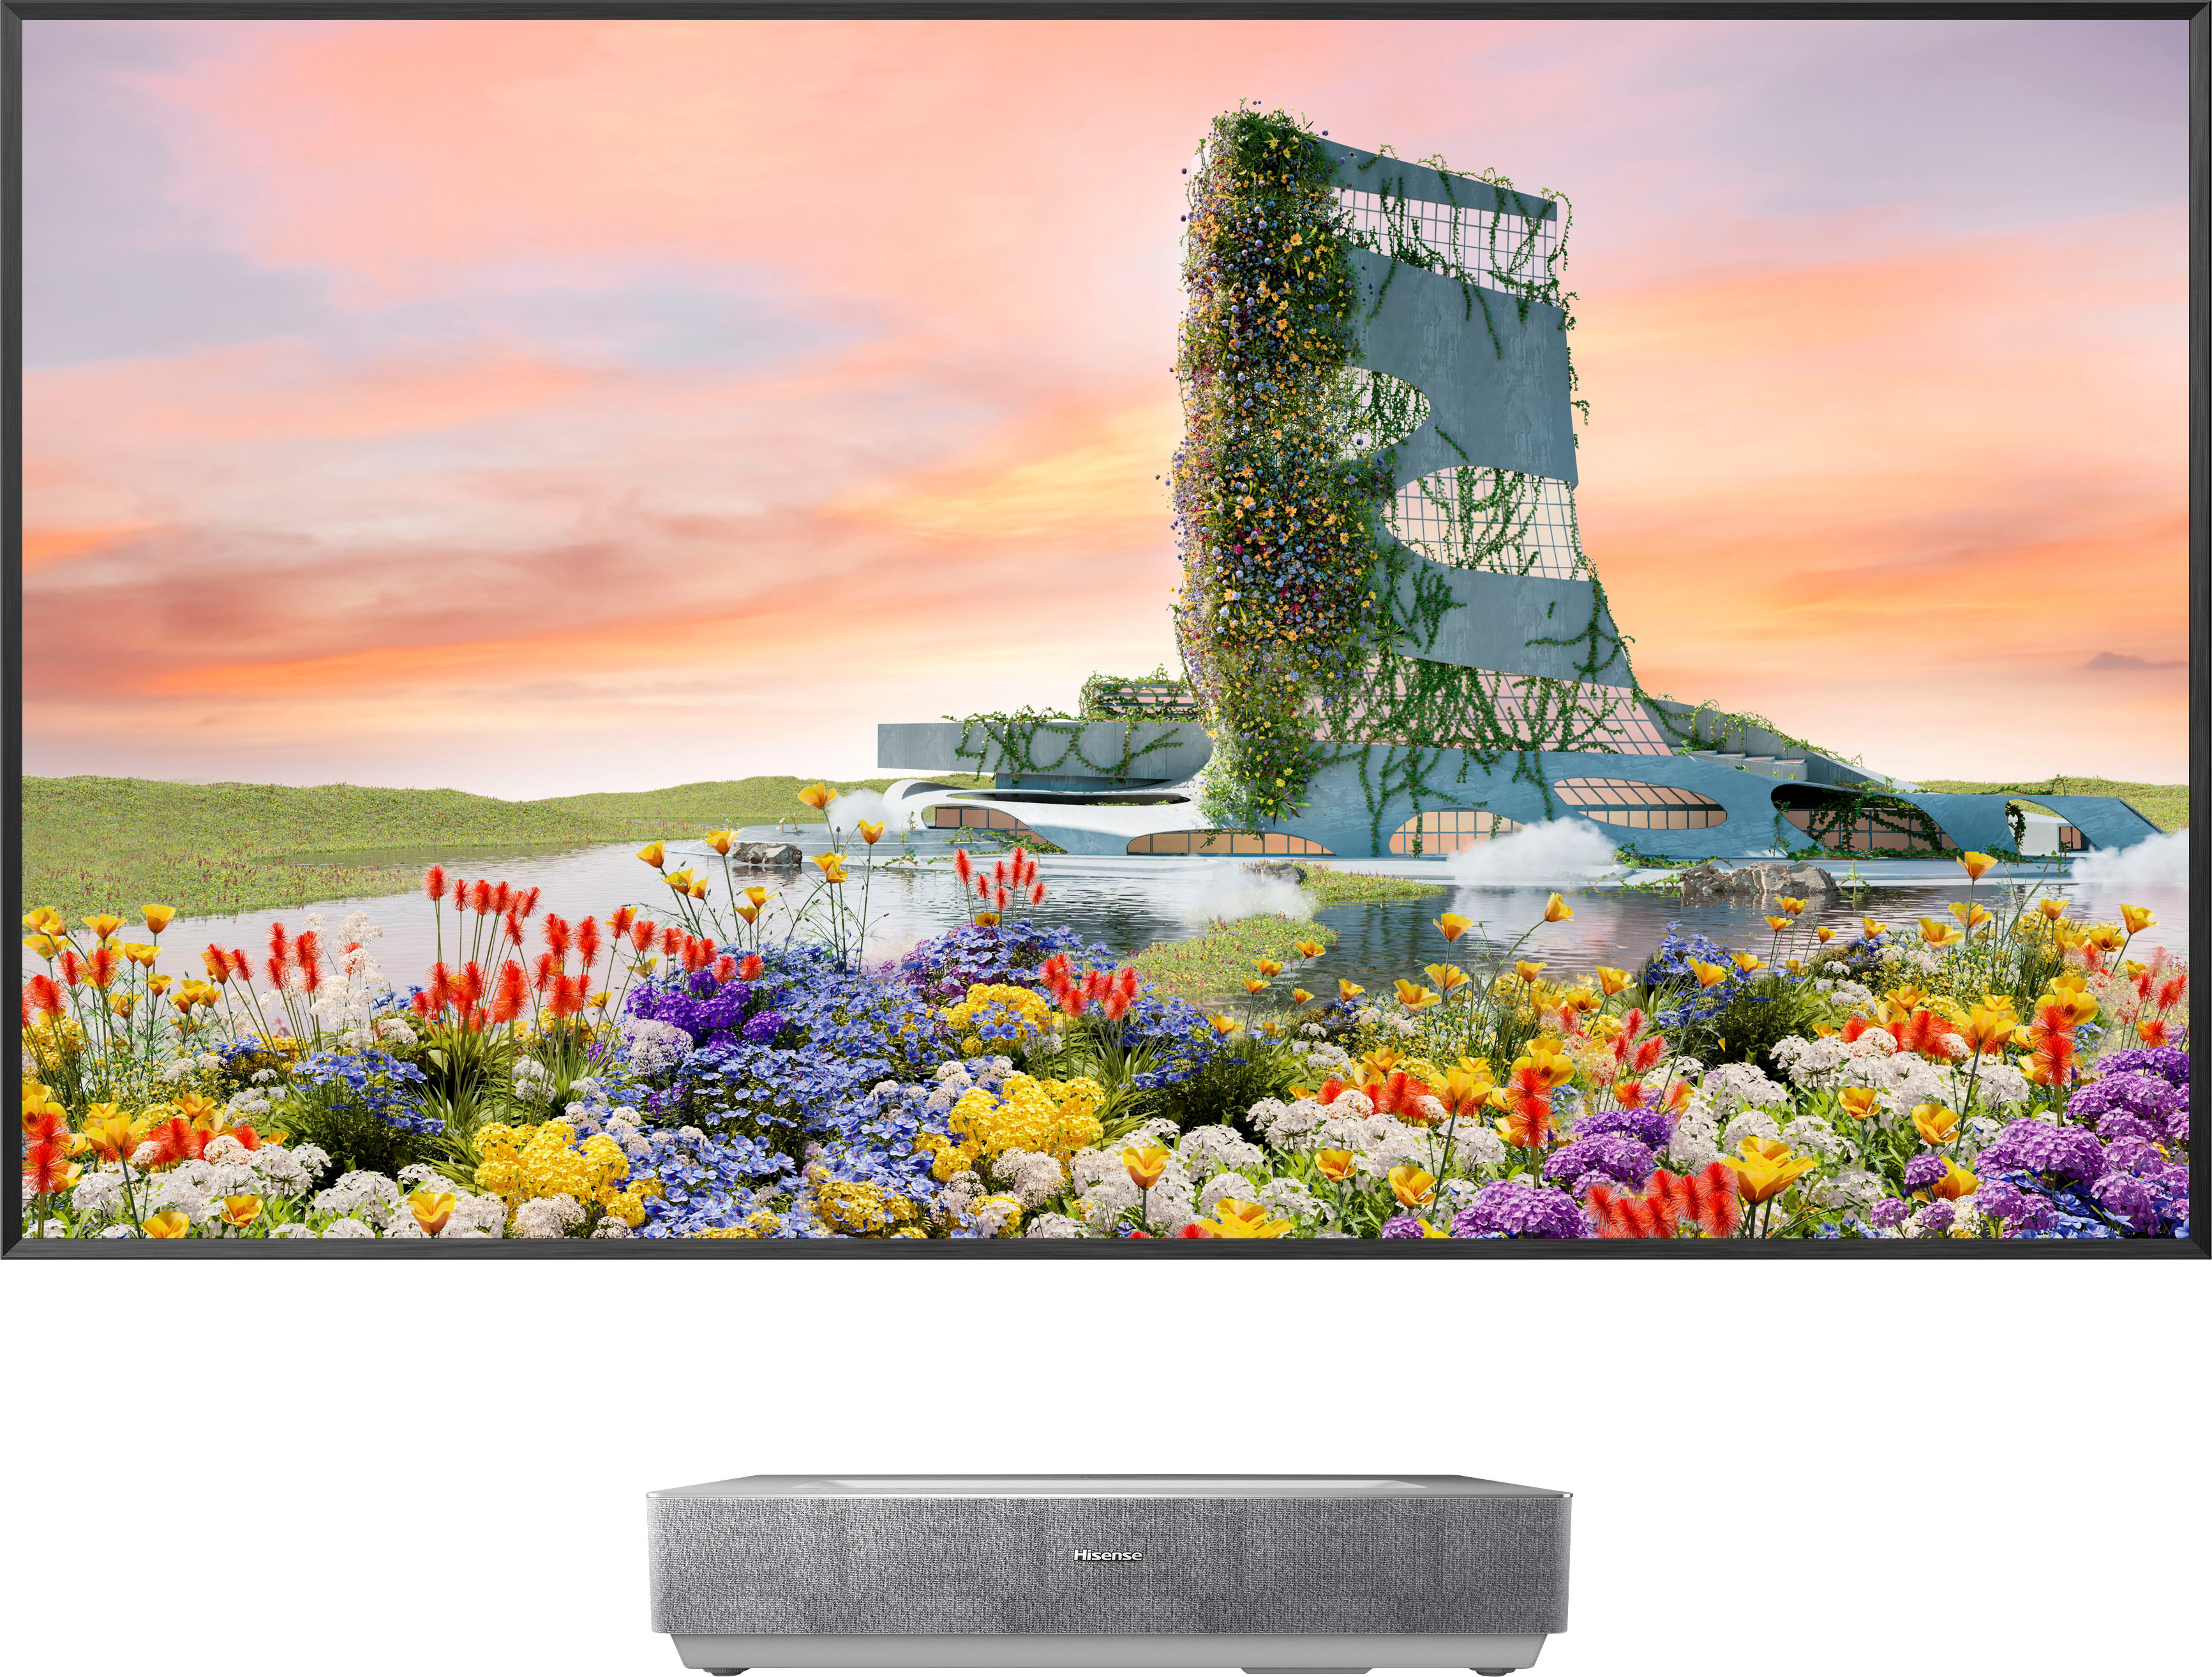 Hisense L5G Laser TV Ultra Short Throw Projector with  - Best Buy